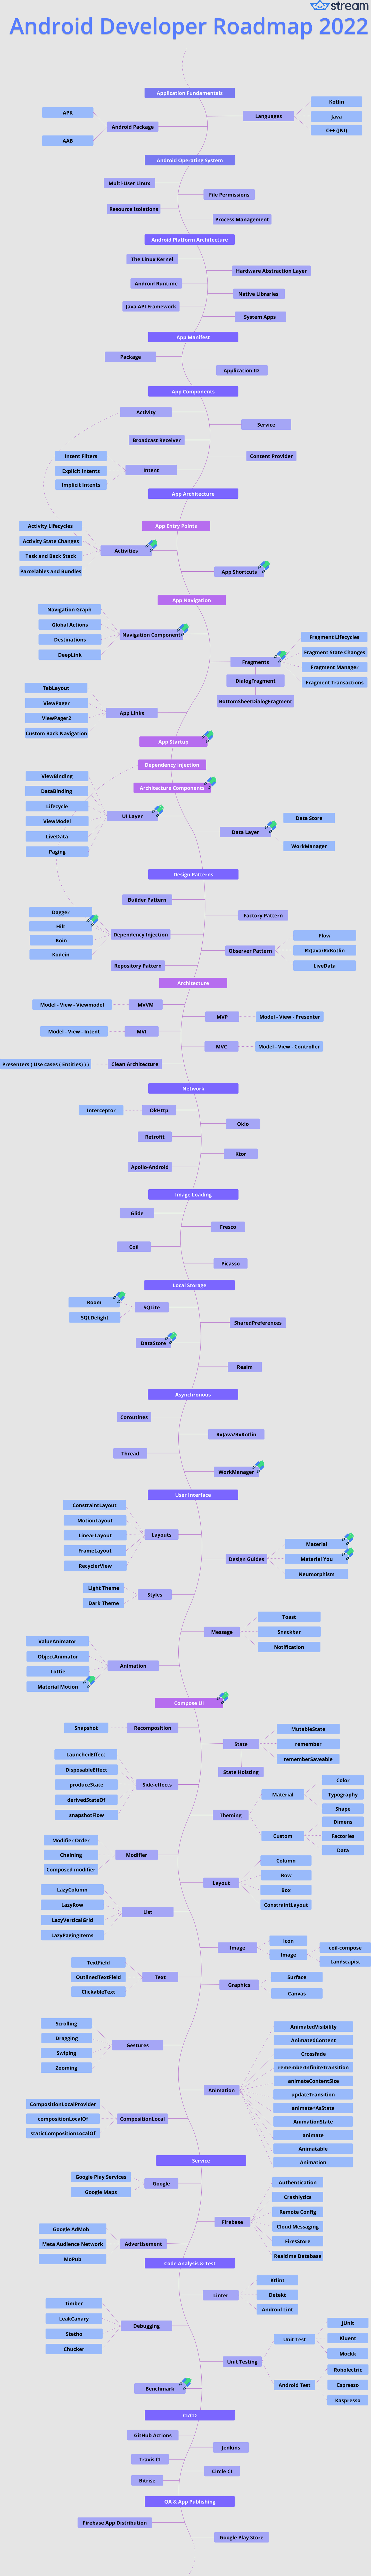 android_developer_roadmap.png